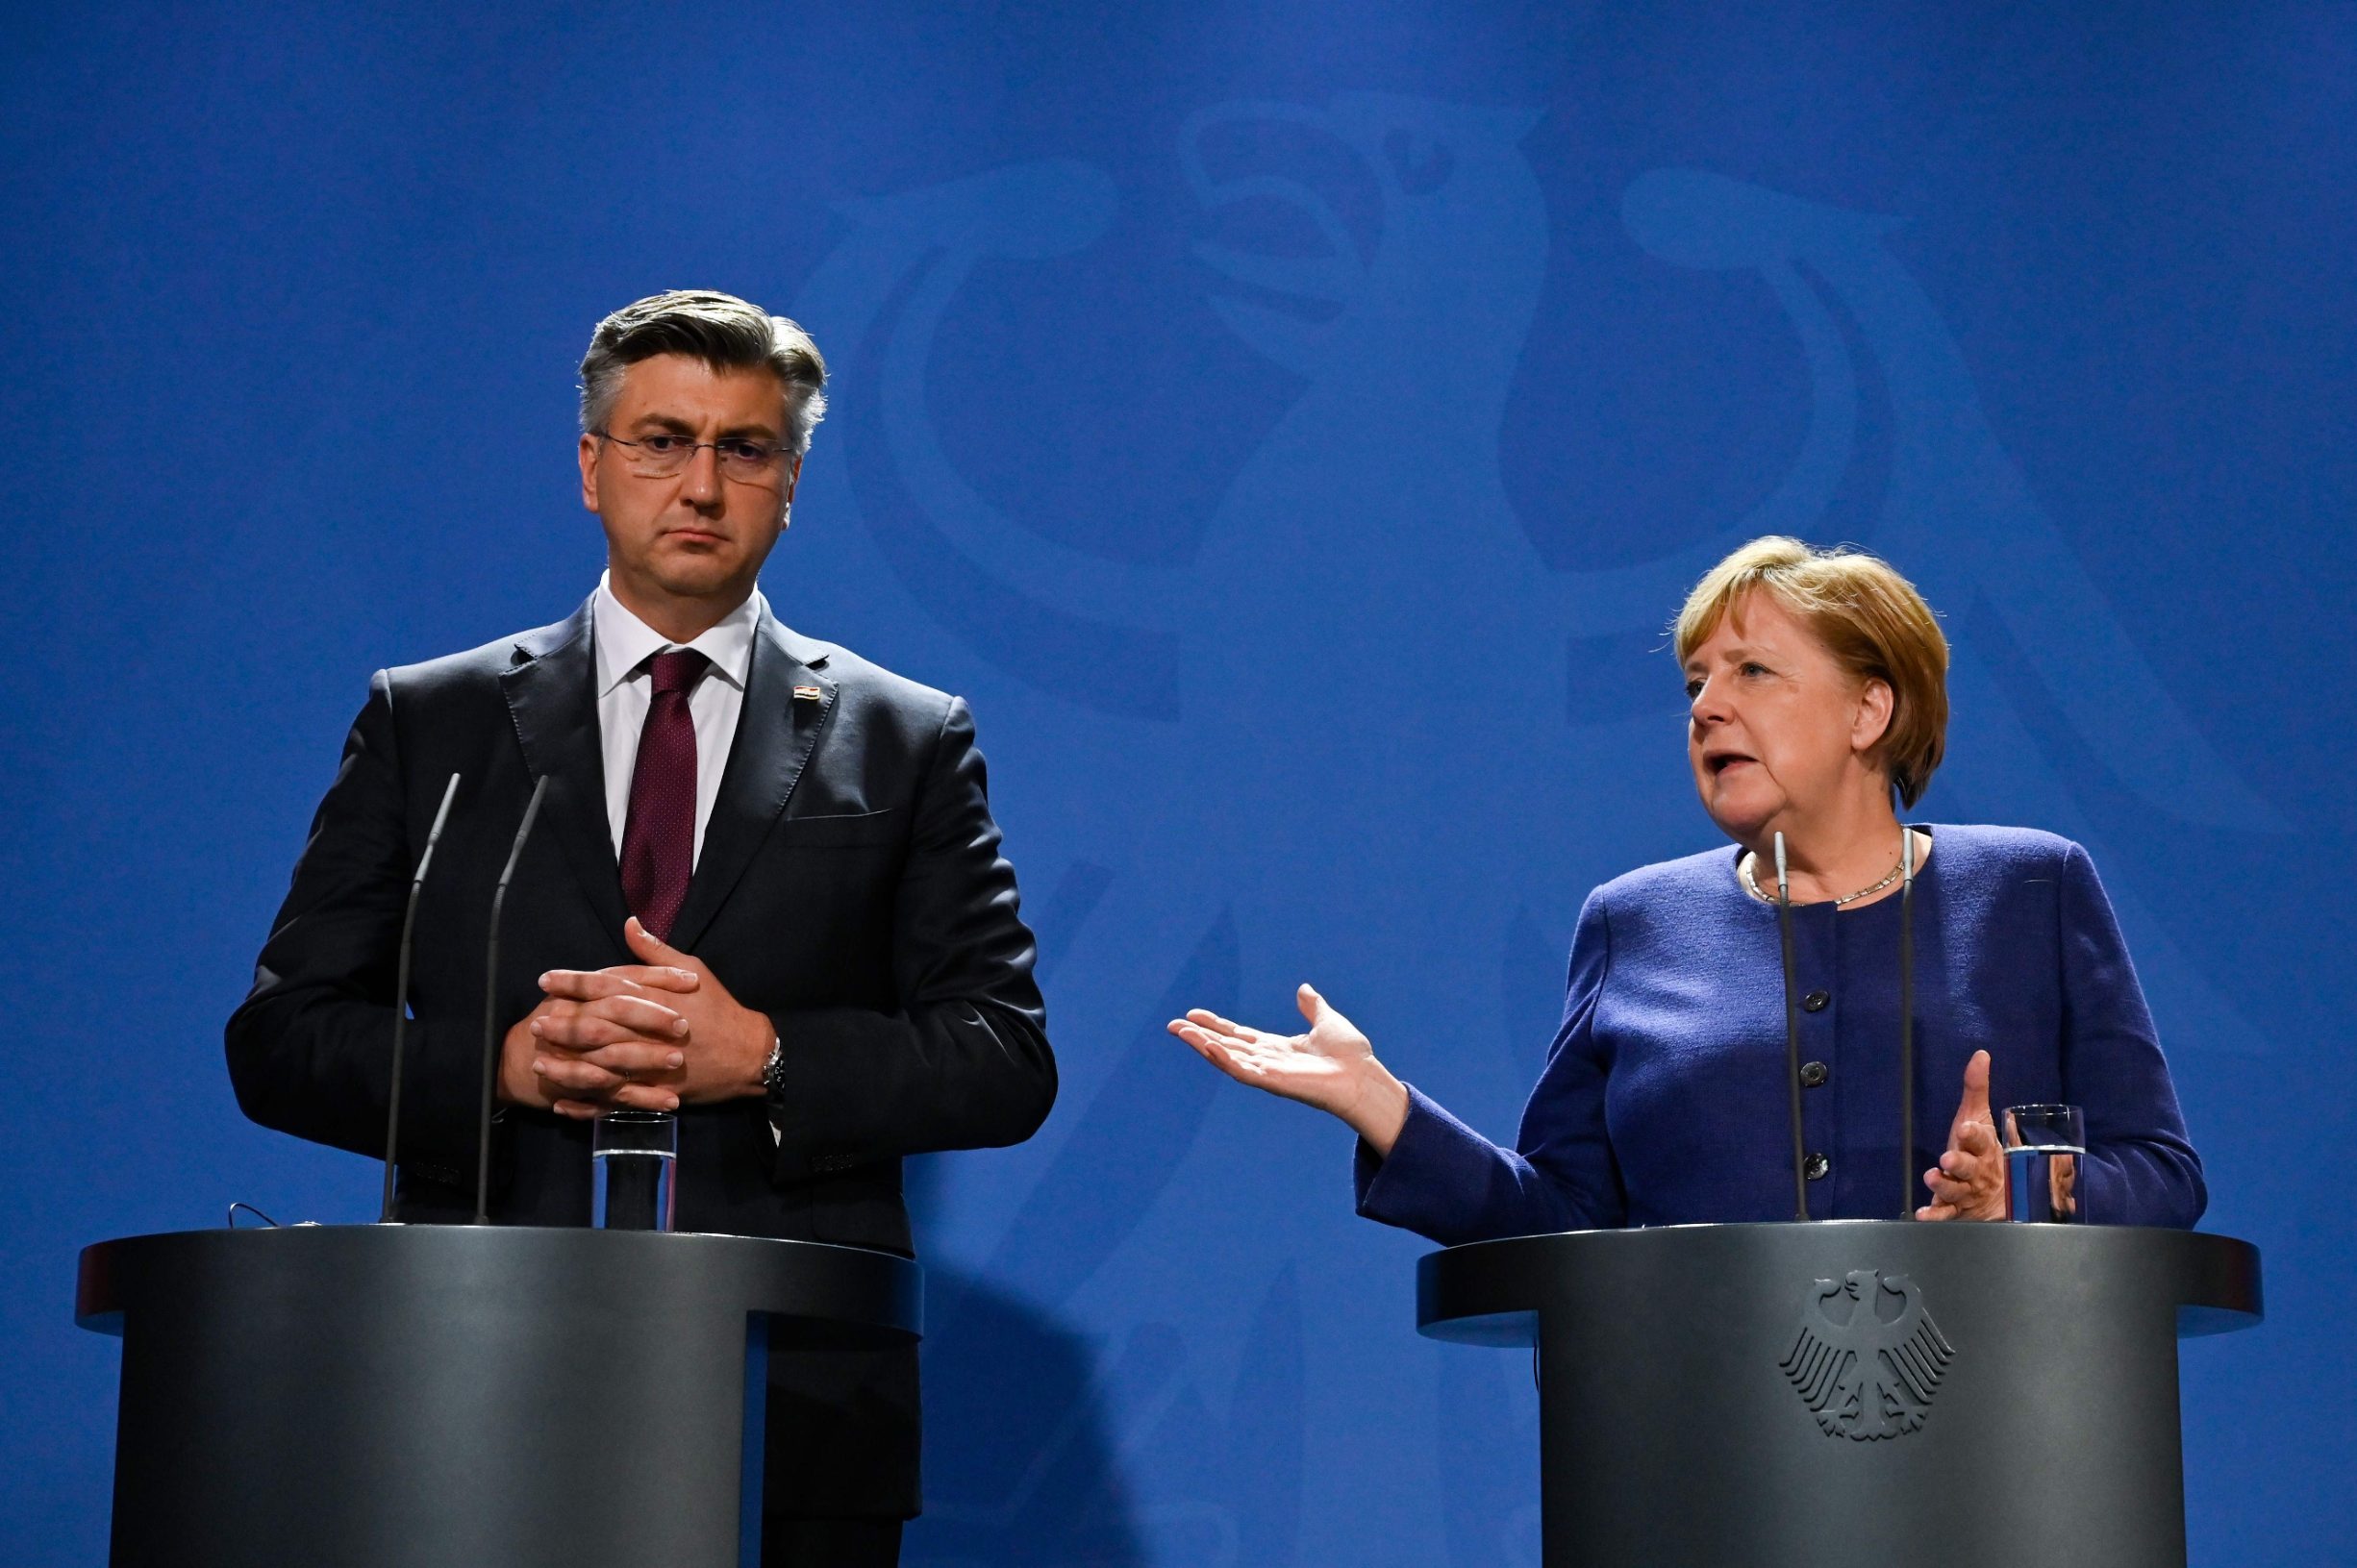 German Chancellor Angela Merkel (R) and Croatian Prime Minister Andrej Plenkovic address a press conference at the Chancellery on January 16, 2020 in Berlin. (Photo by John MACDOUGALL / AFP)